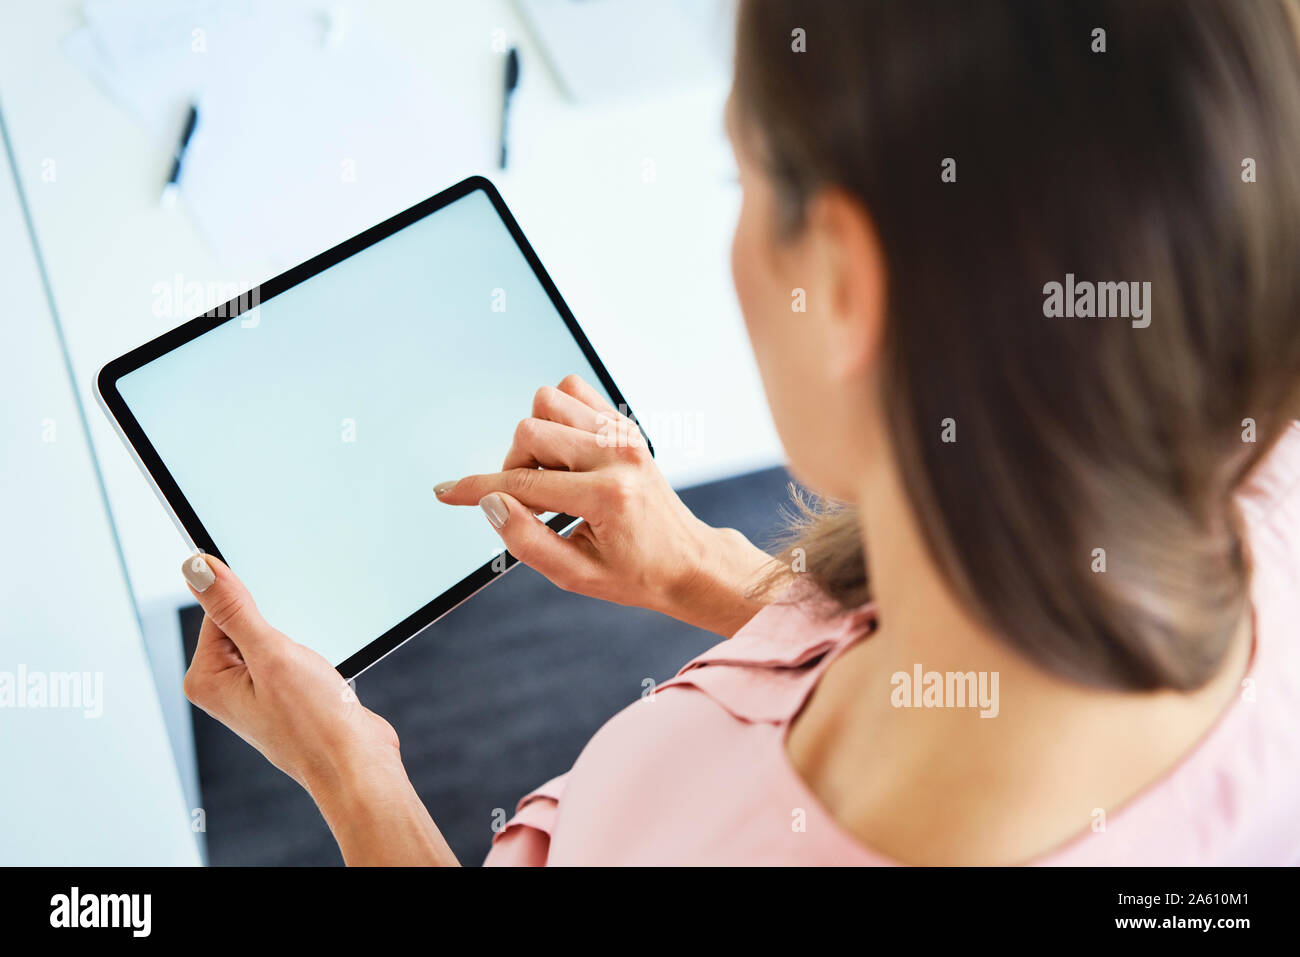 Overhead view of woman using tablet in office Stock Photo